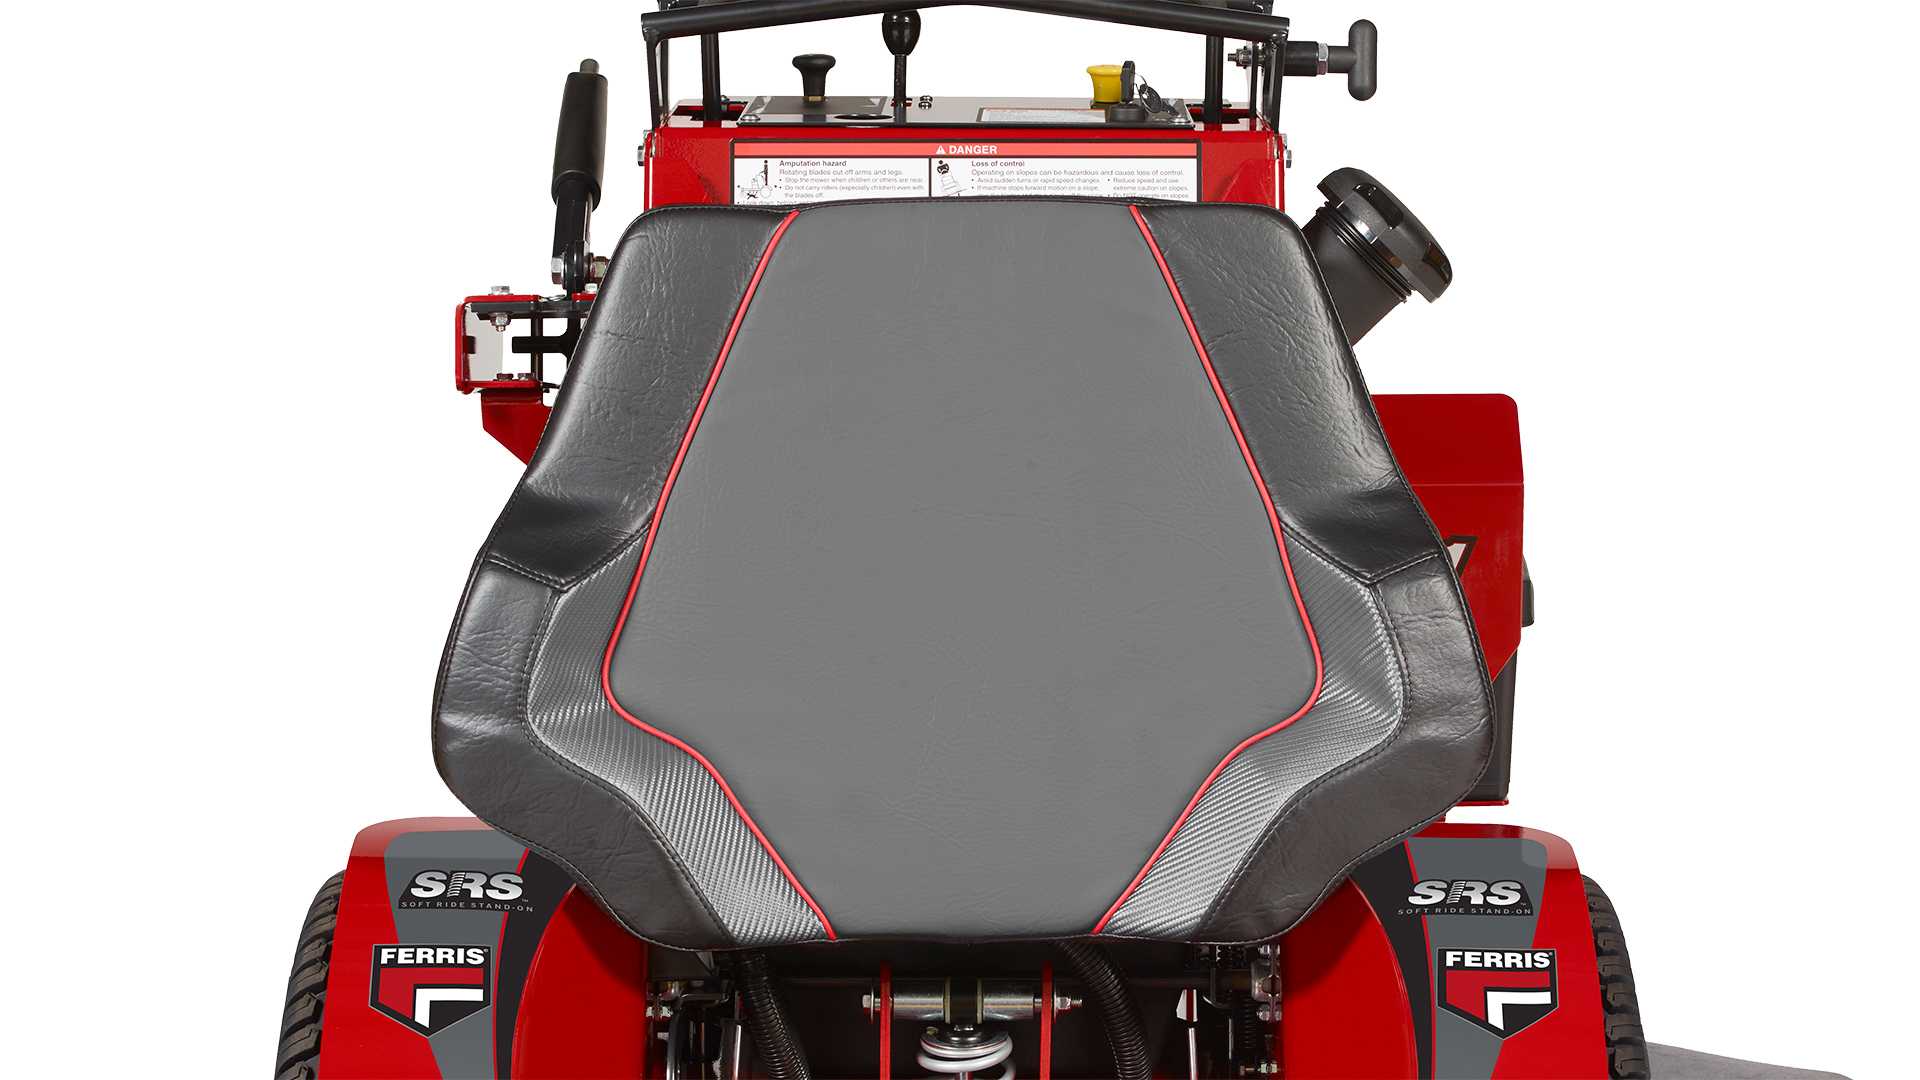 Ferris SRS™ Z1 Soft Ride Stand-On Mowers - Standing Comfort